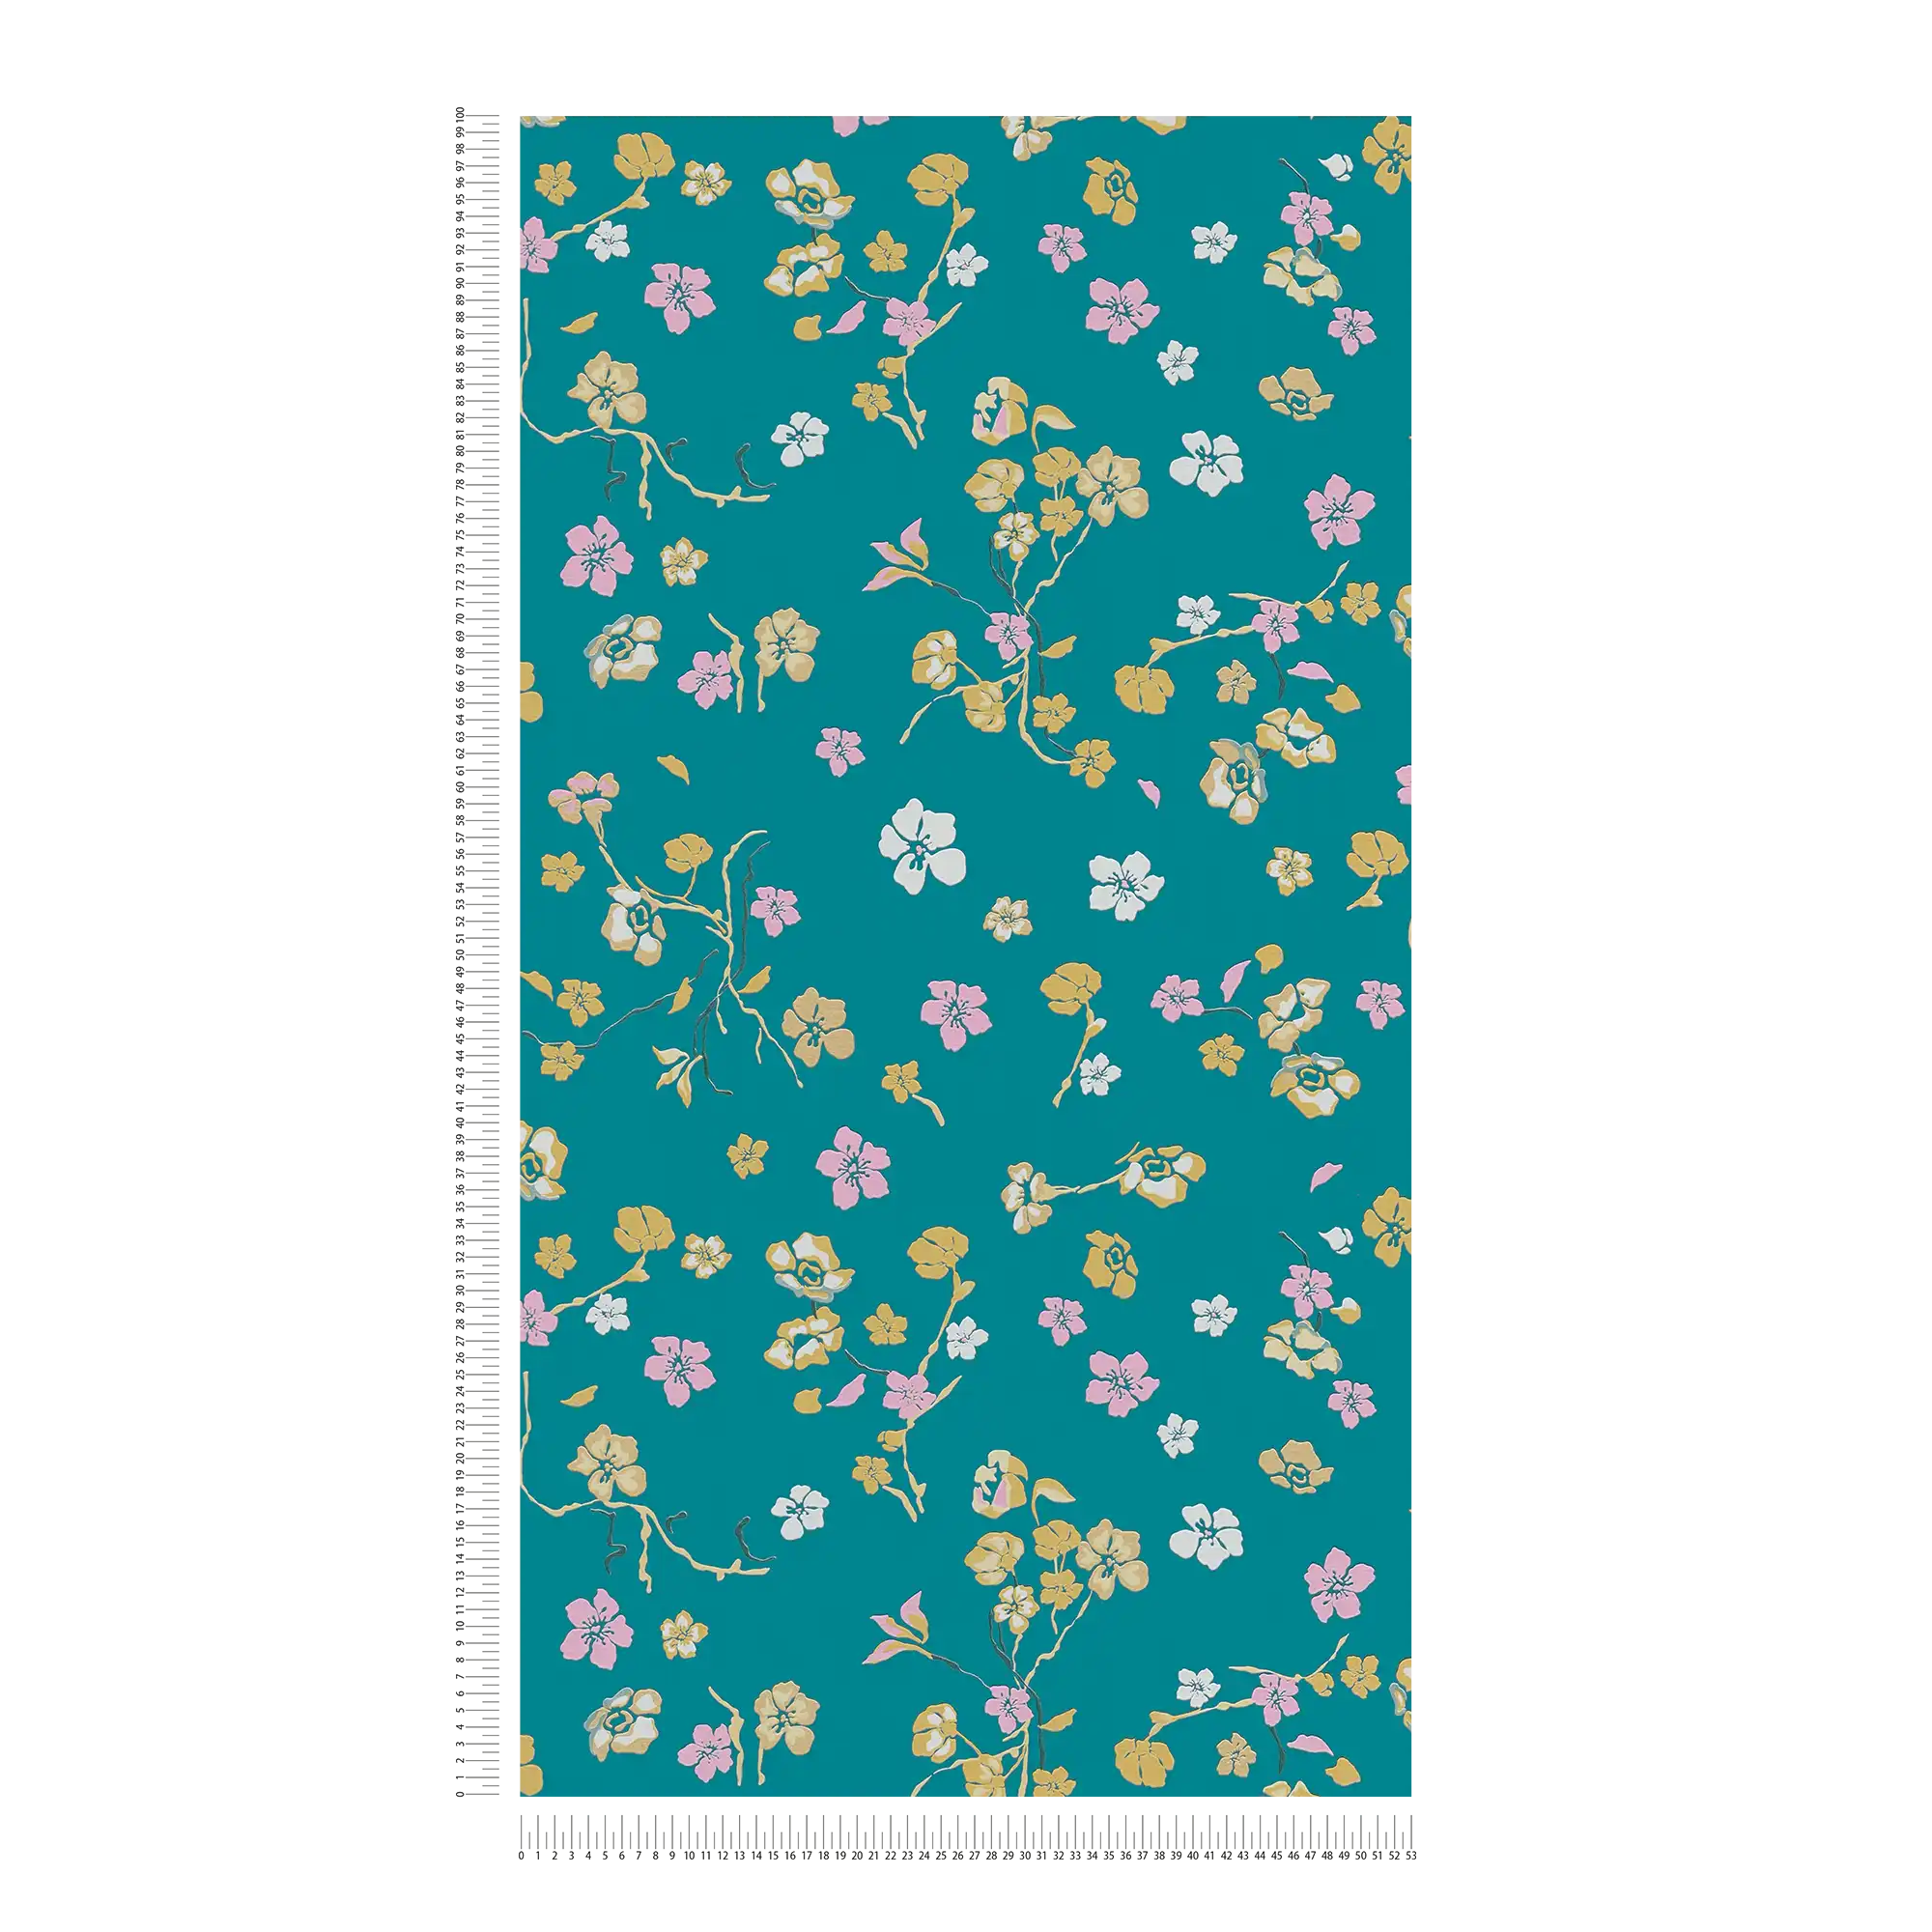             Floral wallpaper in country style with gloss - turquoise, yellow, pink
        